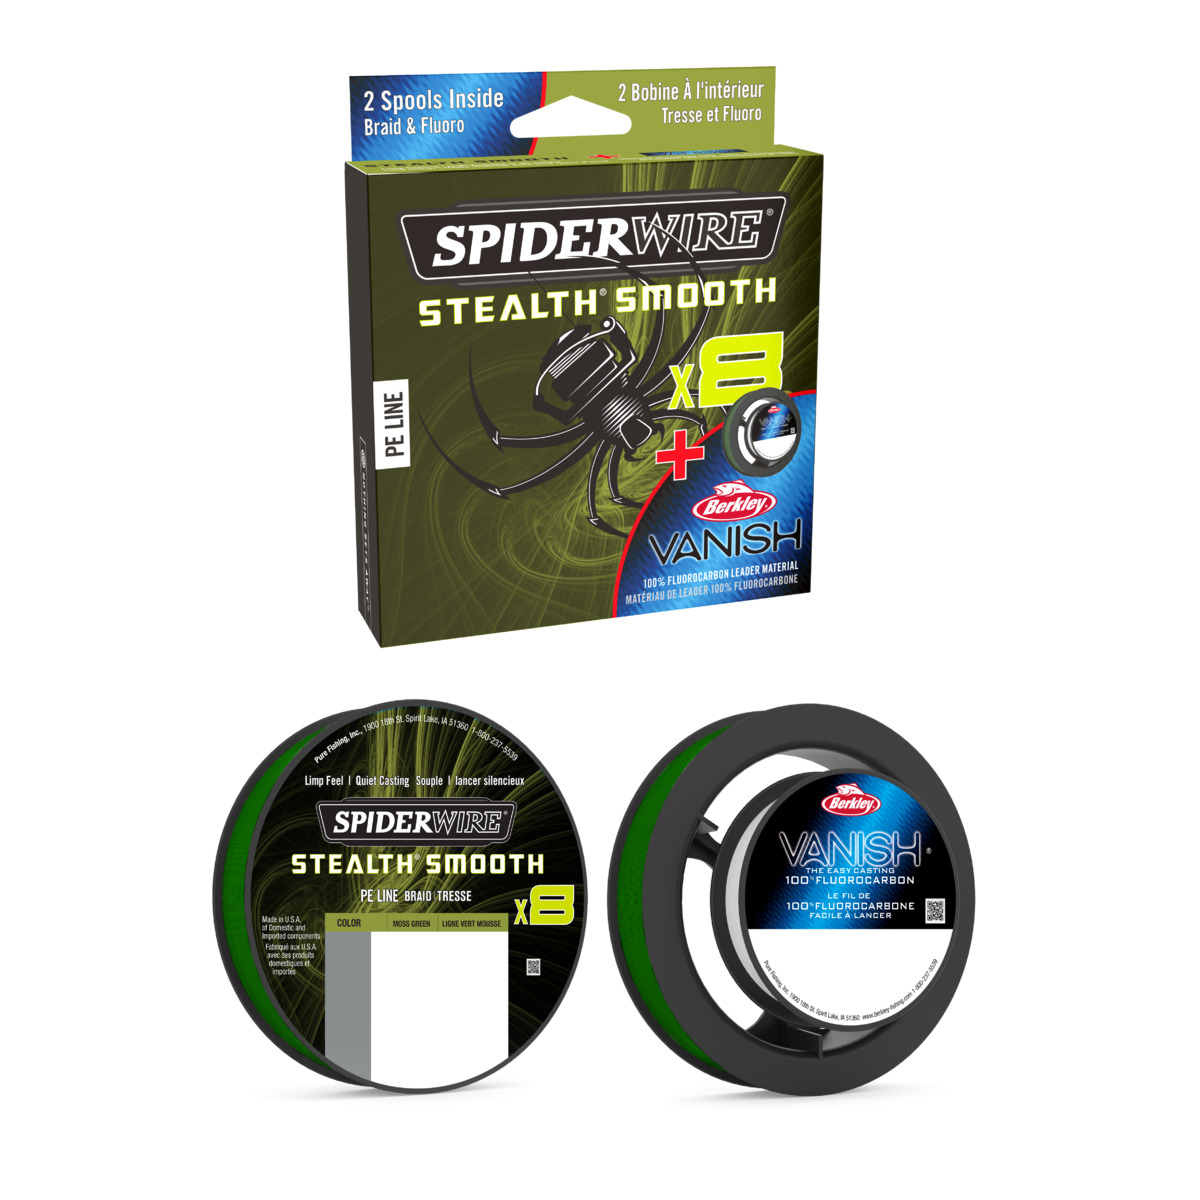 Spiderwire 8 Braid And Fluorocarbon Duo Spool System - 150 m msgrn/Vanish 40 m 0.13/0.40 mm